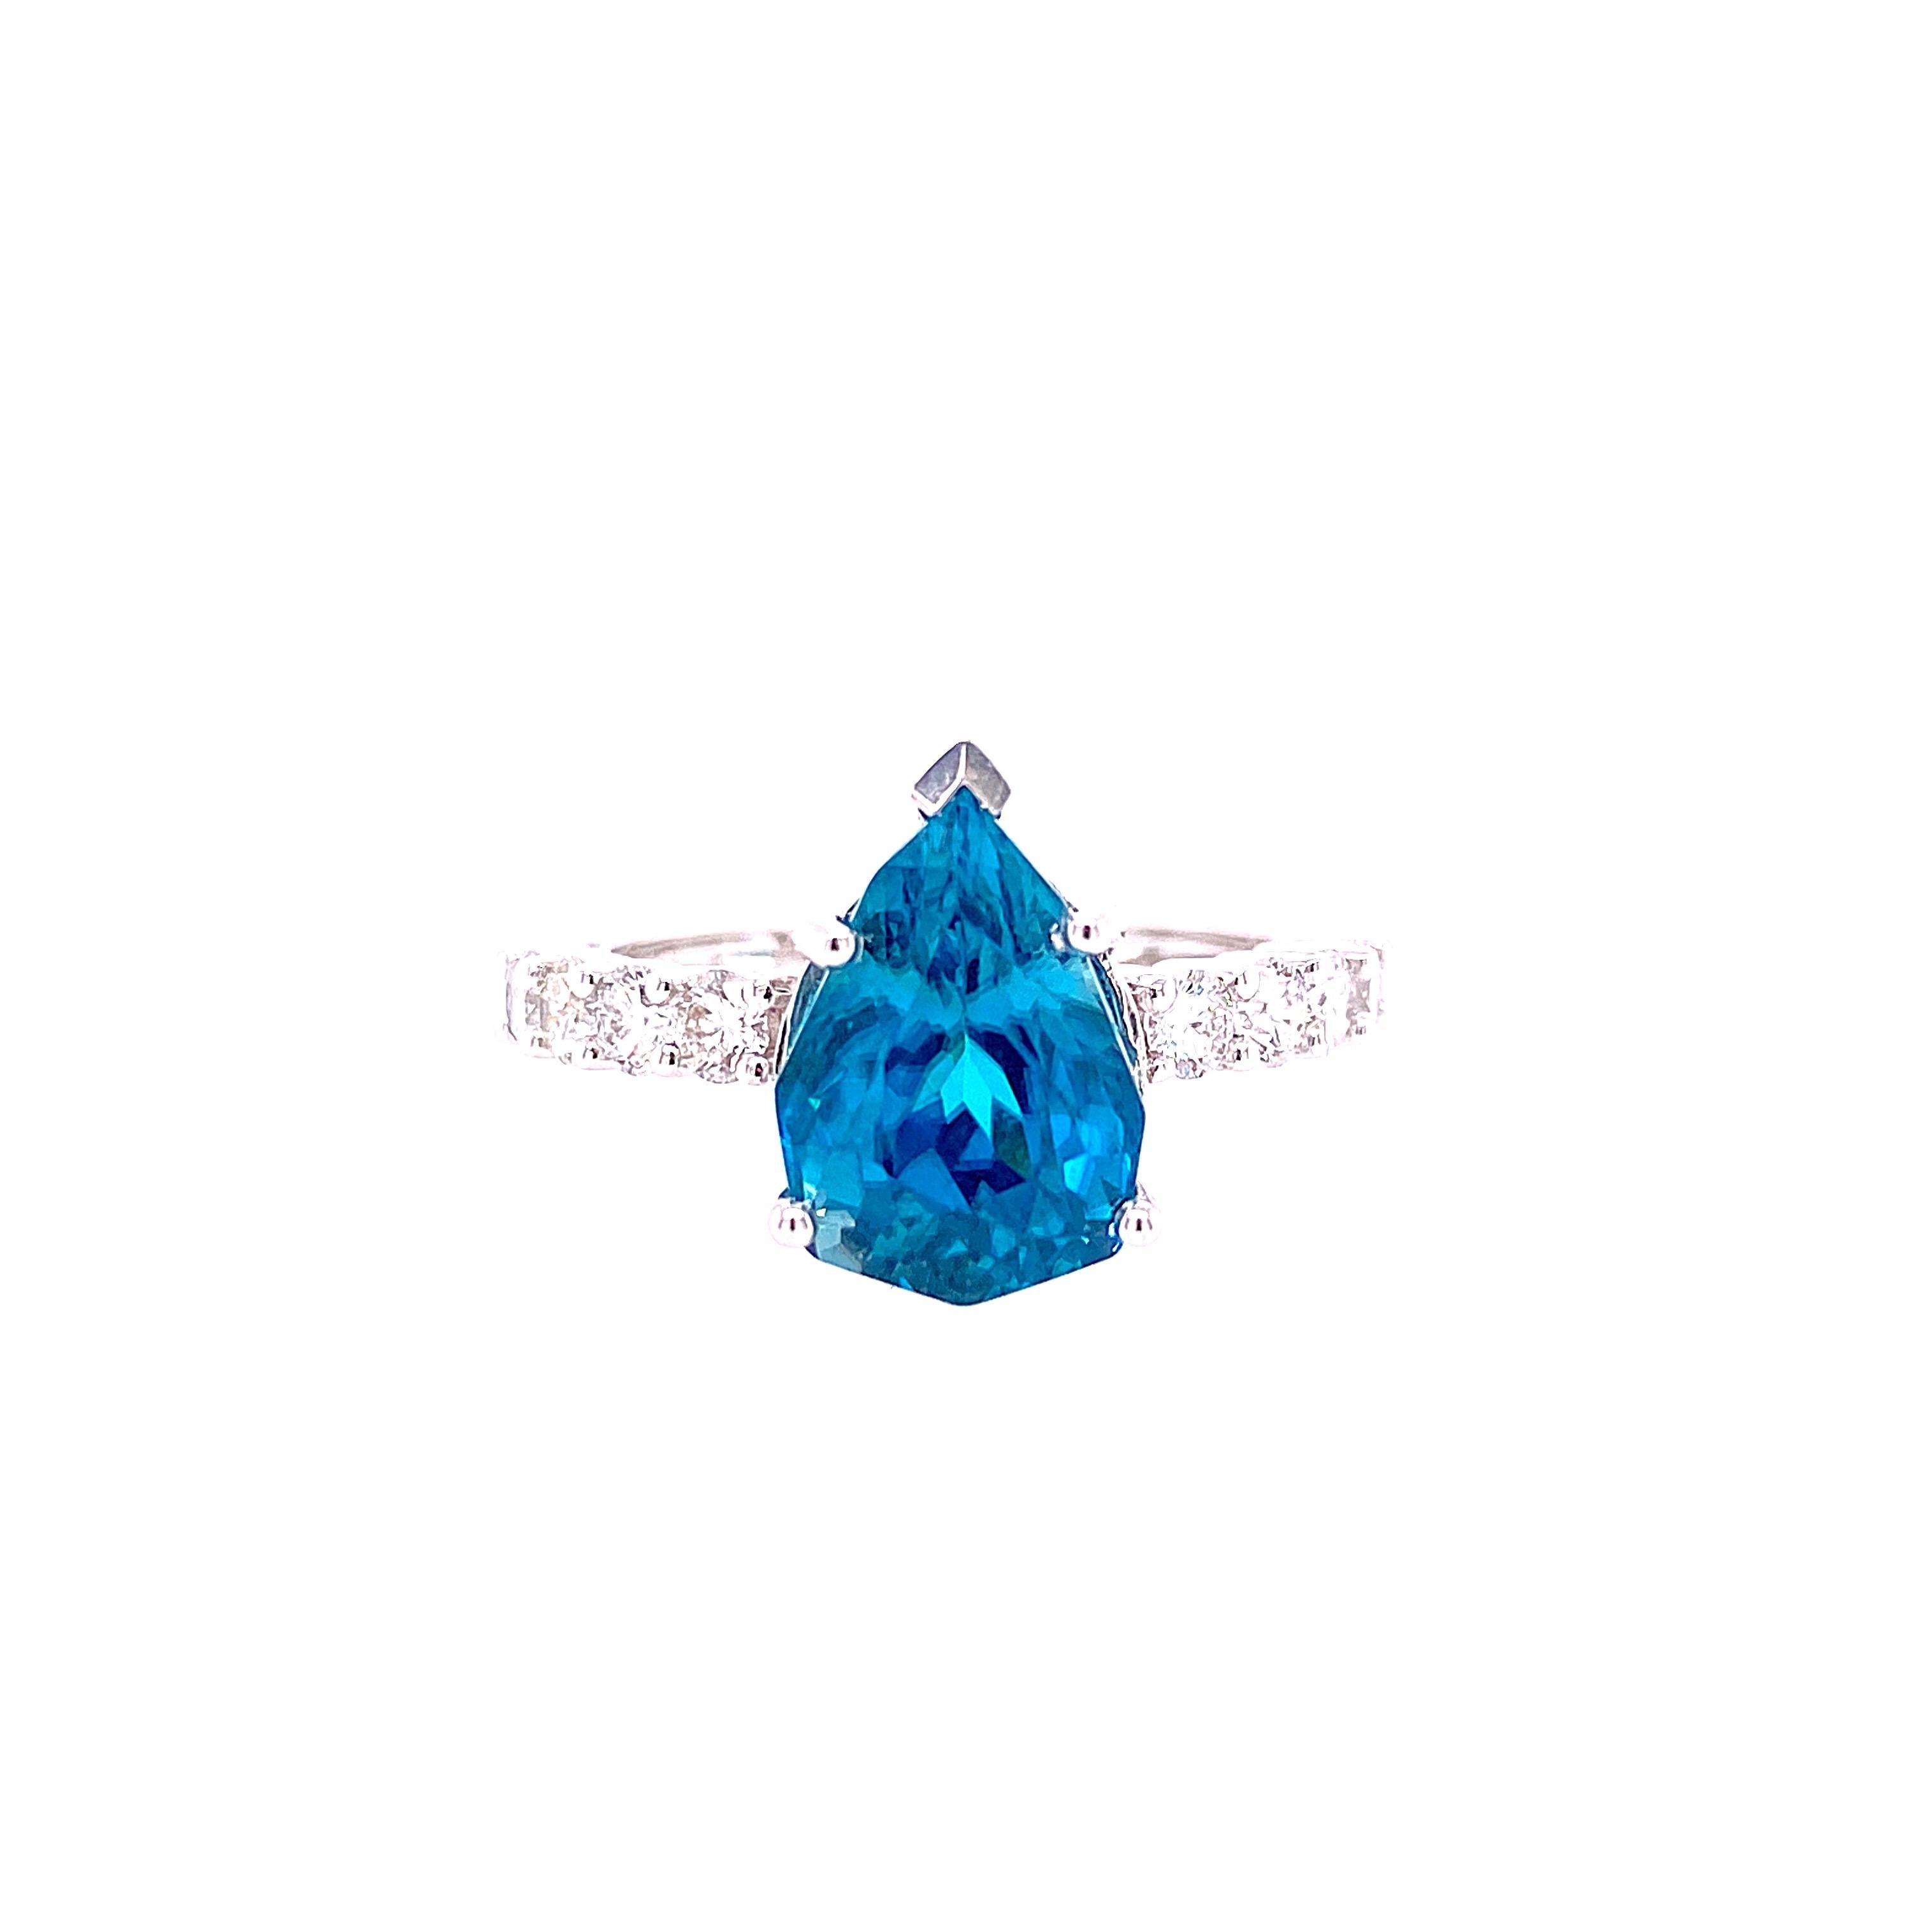 This stunning Cocktail Ring features a beautiful 5.52 Carat Pear Blue Zircon on a Half Diamond Shank. This Ring is set in 18K White Gold. 
Total Diamond Weight = 0.59 Carats. Ring Size is 6 1/2.